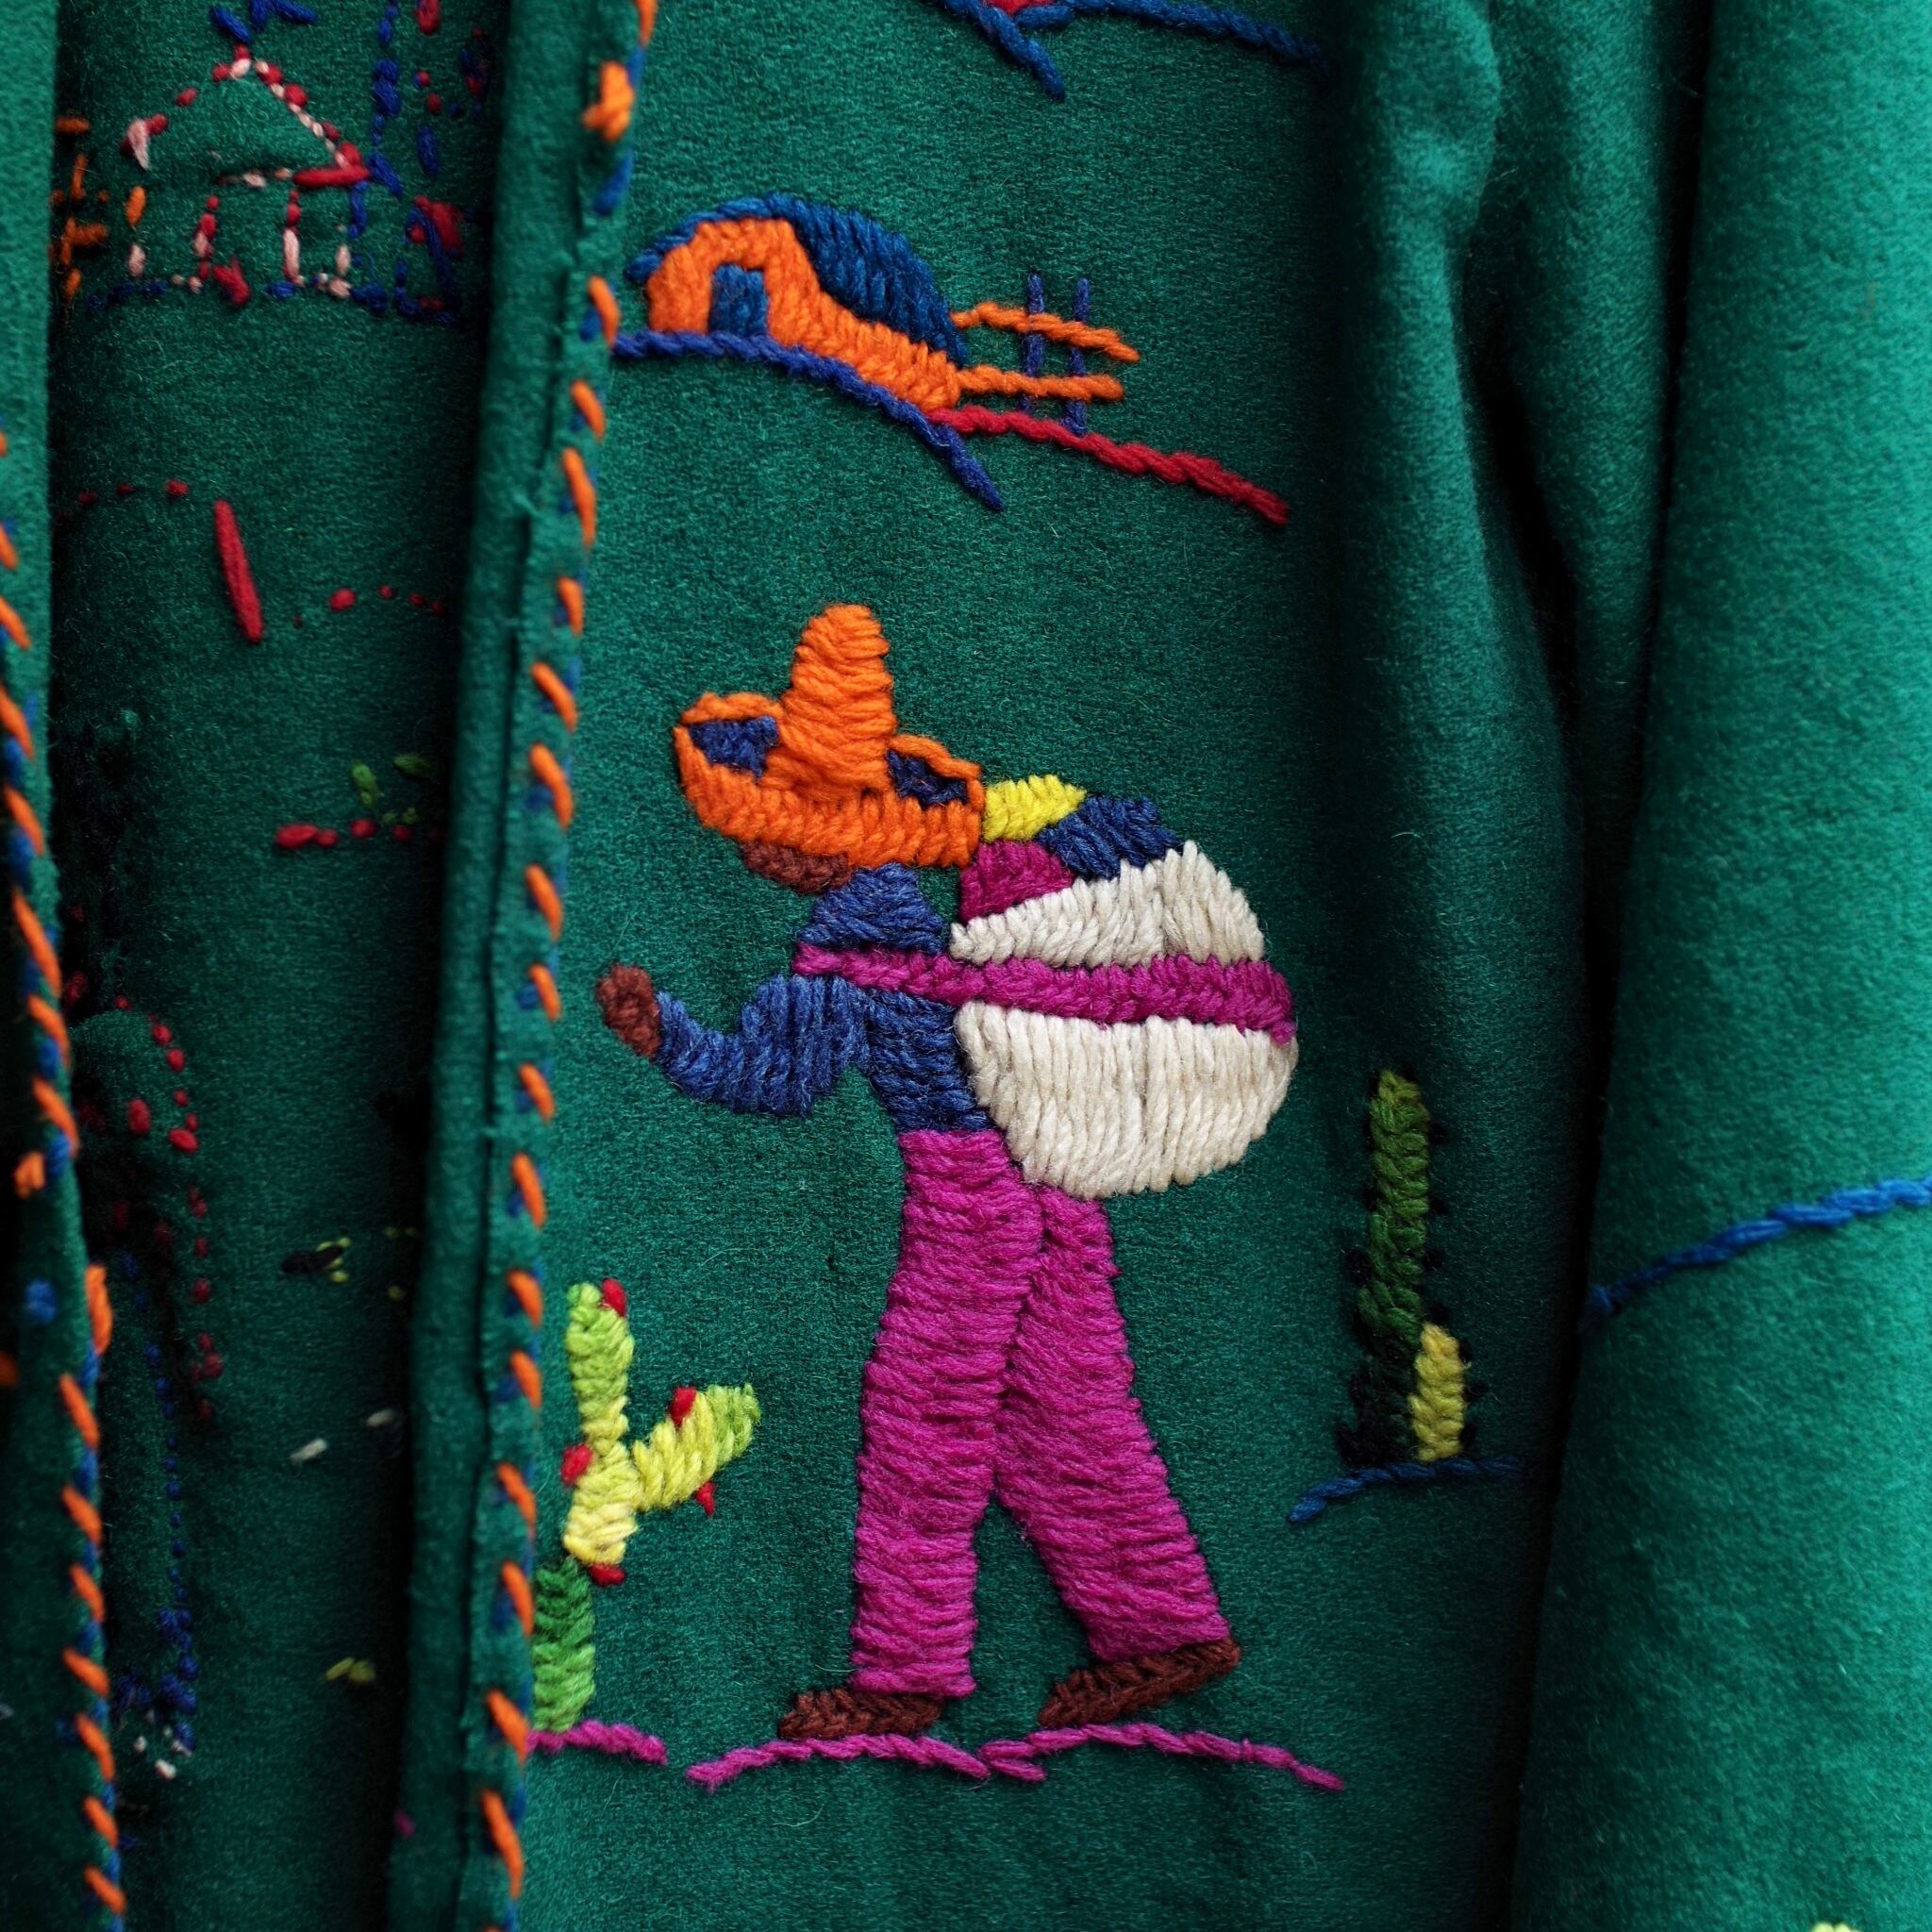 Mexican Embroidery Souvenir Jacket / メキシカン 刺繍入り